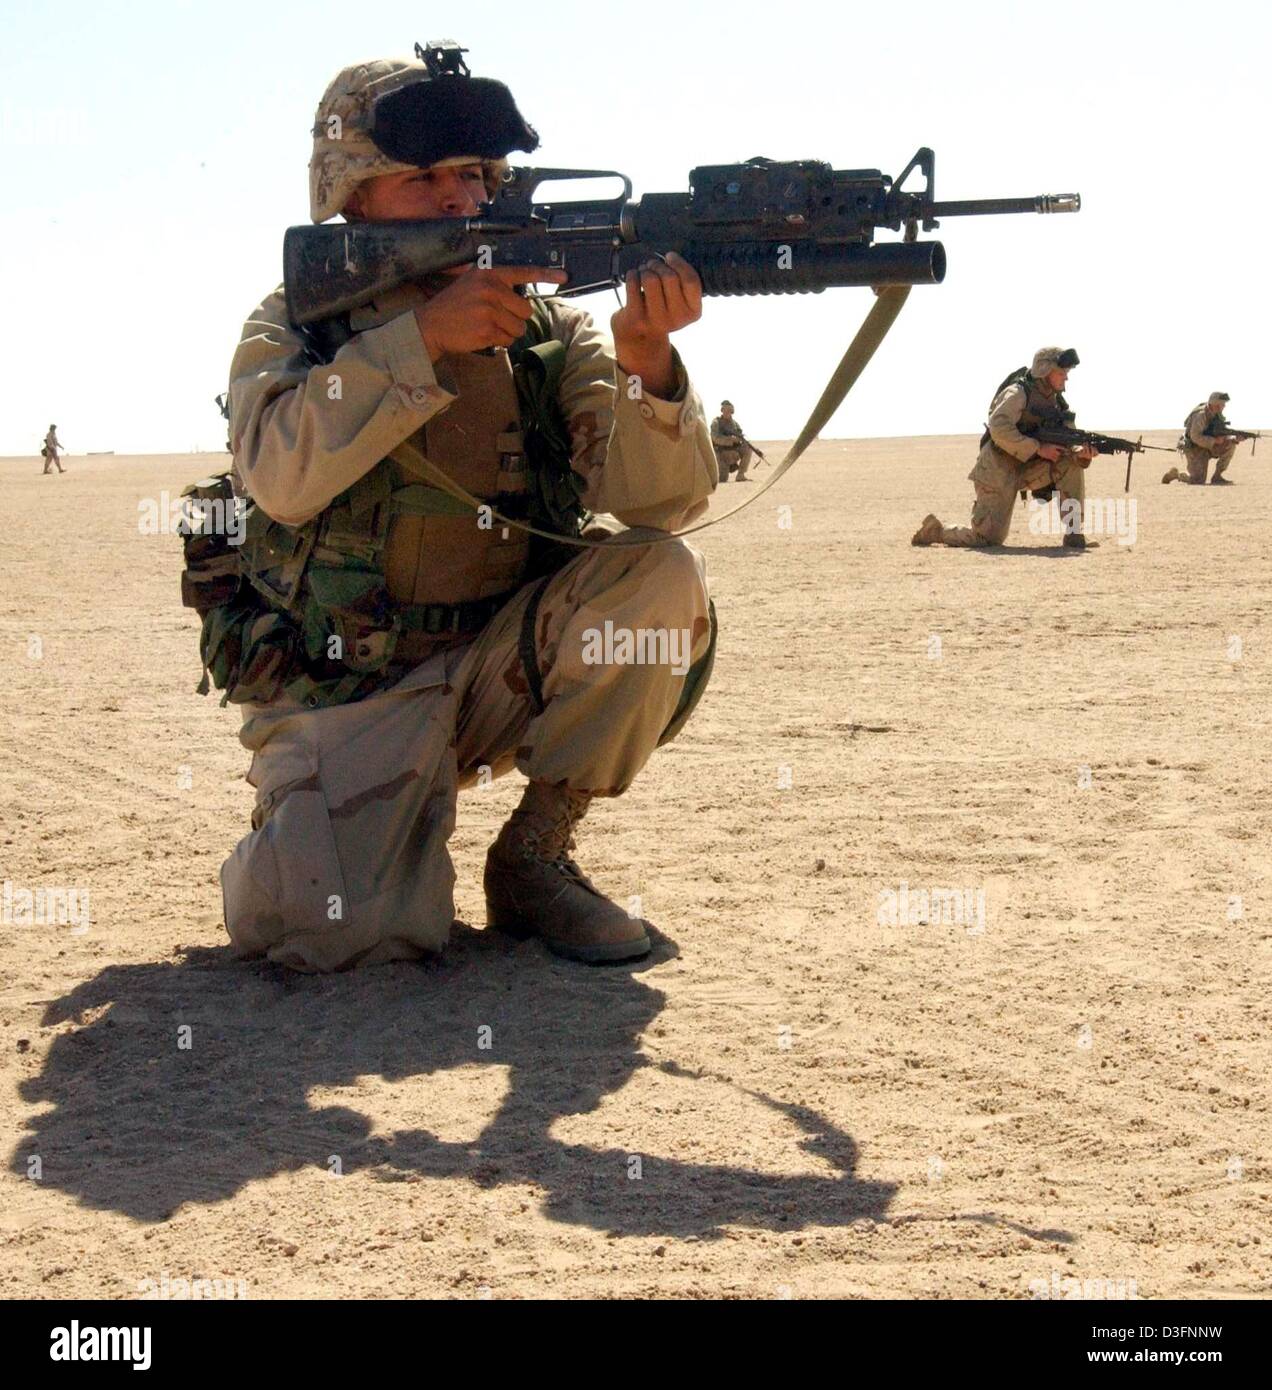 (dpa) - A US marine of the 3rd Infantry Battalion practises shooting with live ammunition in Camp Coyote in Kuwait, Asia, 15 March 2003. More than 150,000 US and British soldiers are presently based in Kuwait's northern desert. According to the US Department of Defense, these soldiers are prepared to launch an attack on Iraq. Stock Photo